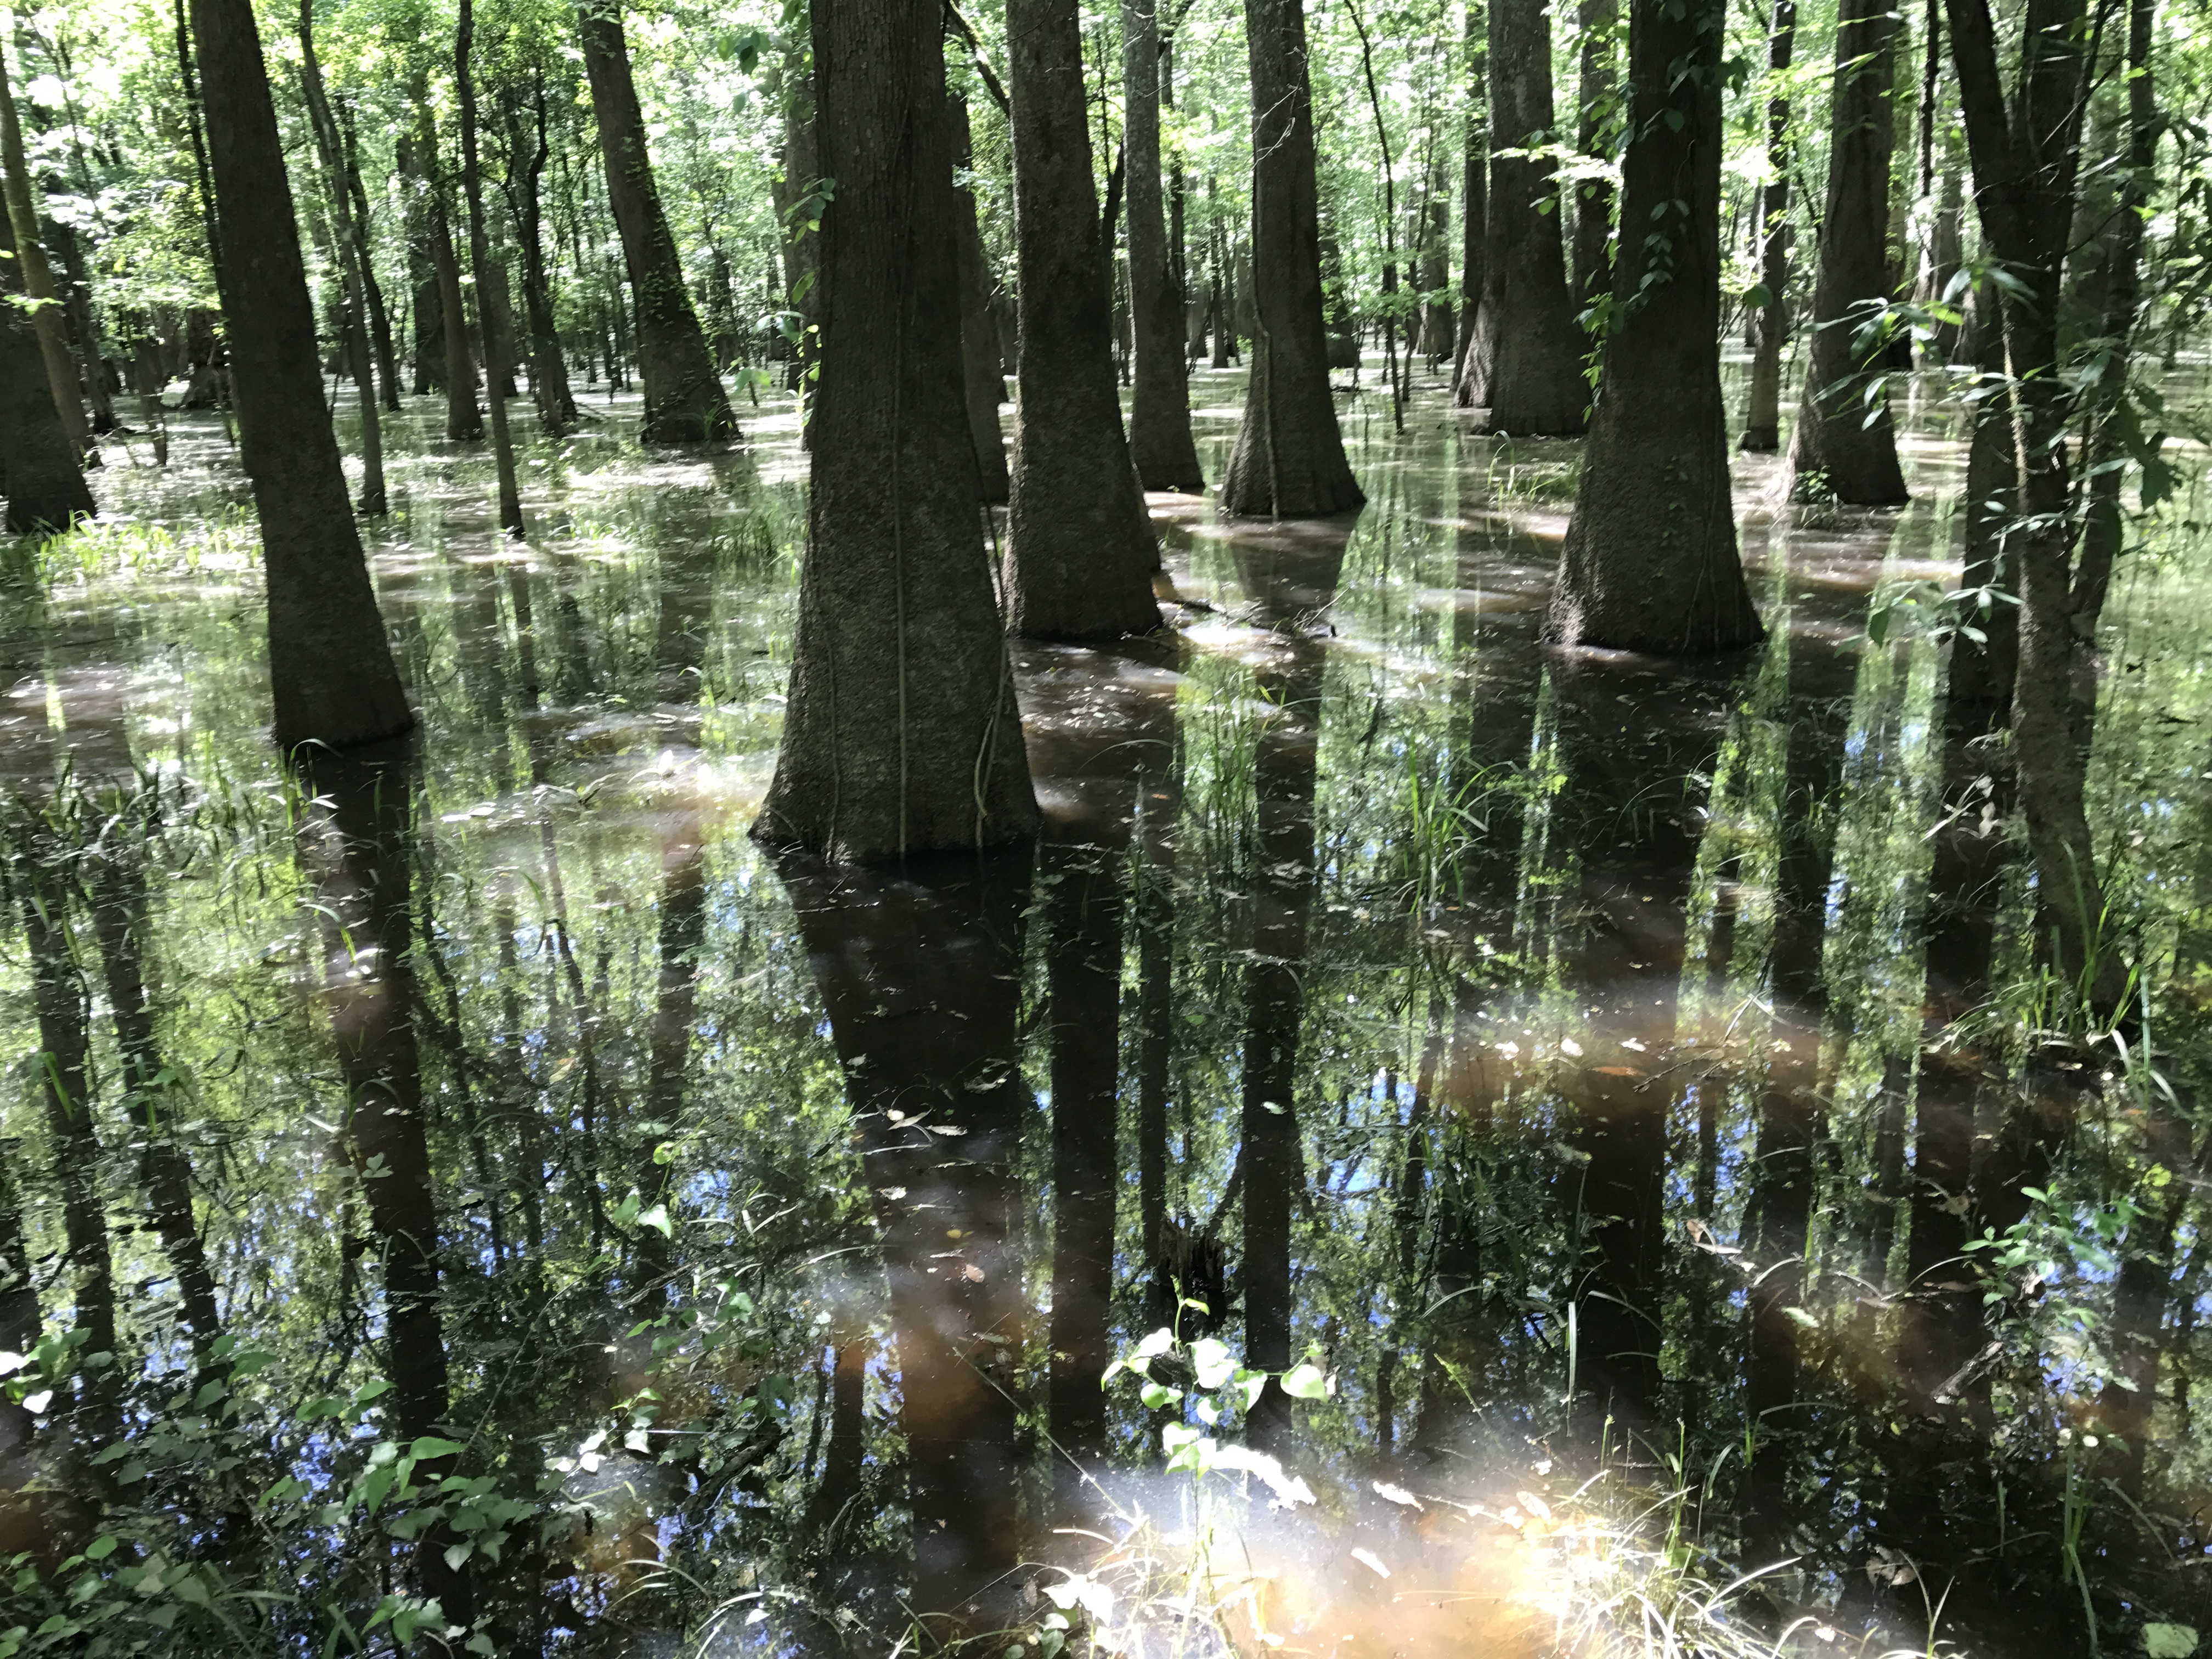 Shaded Swamp From Boardwalk Trail In Congaree National Park